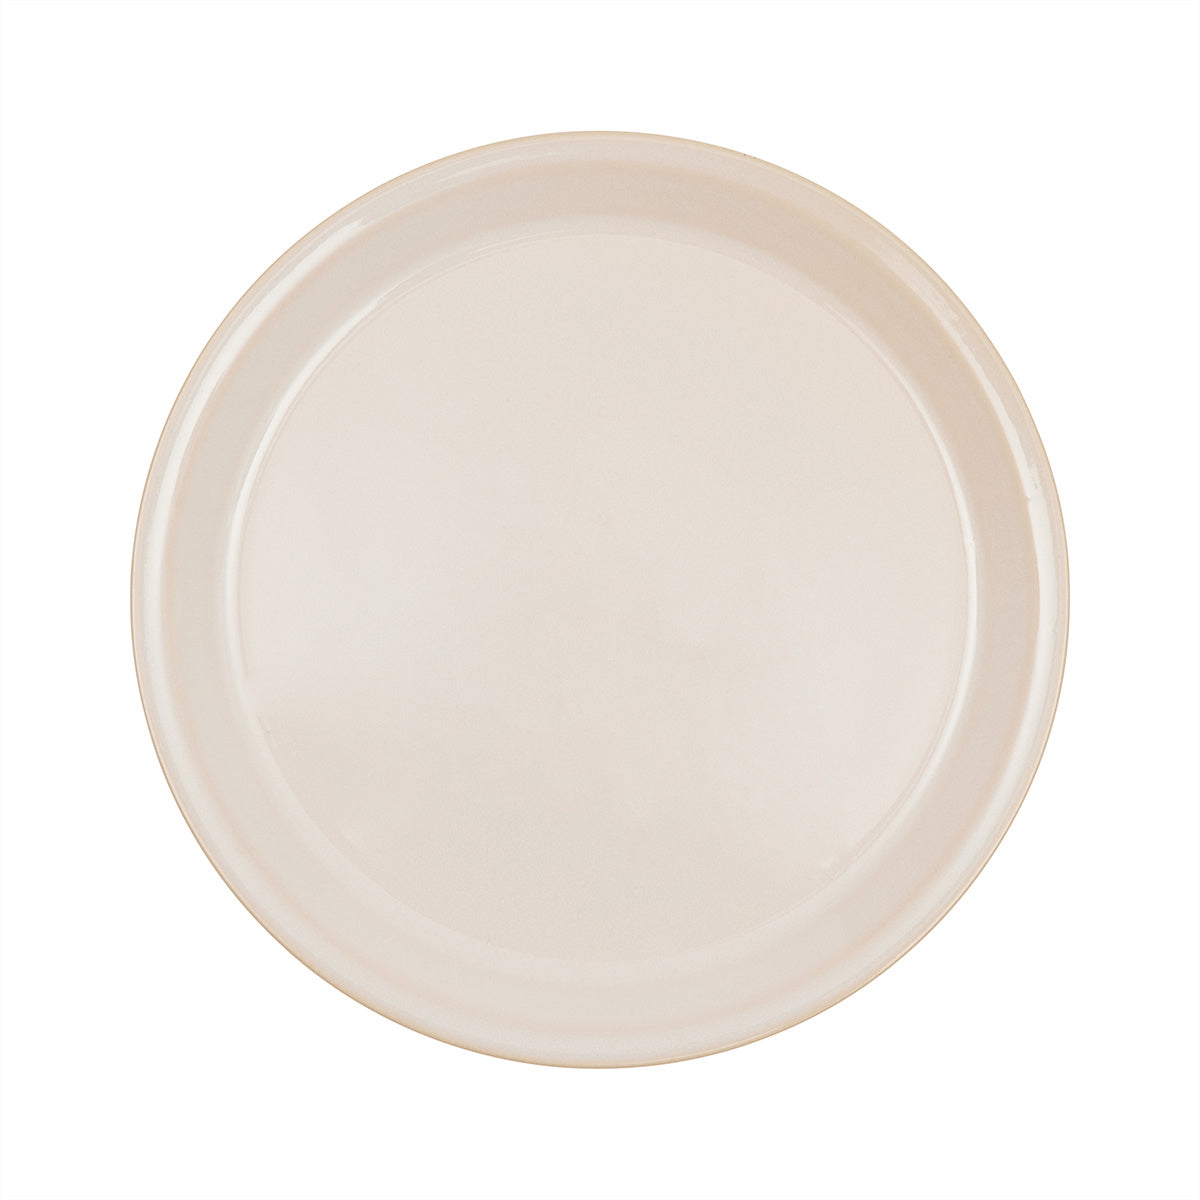 OYOY LIVING Yuka Lunch Plate - Pack of 2 Dining Ware 102 Offwhite